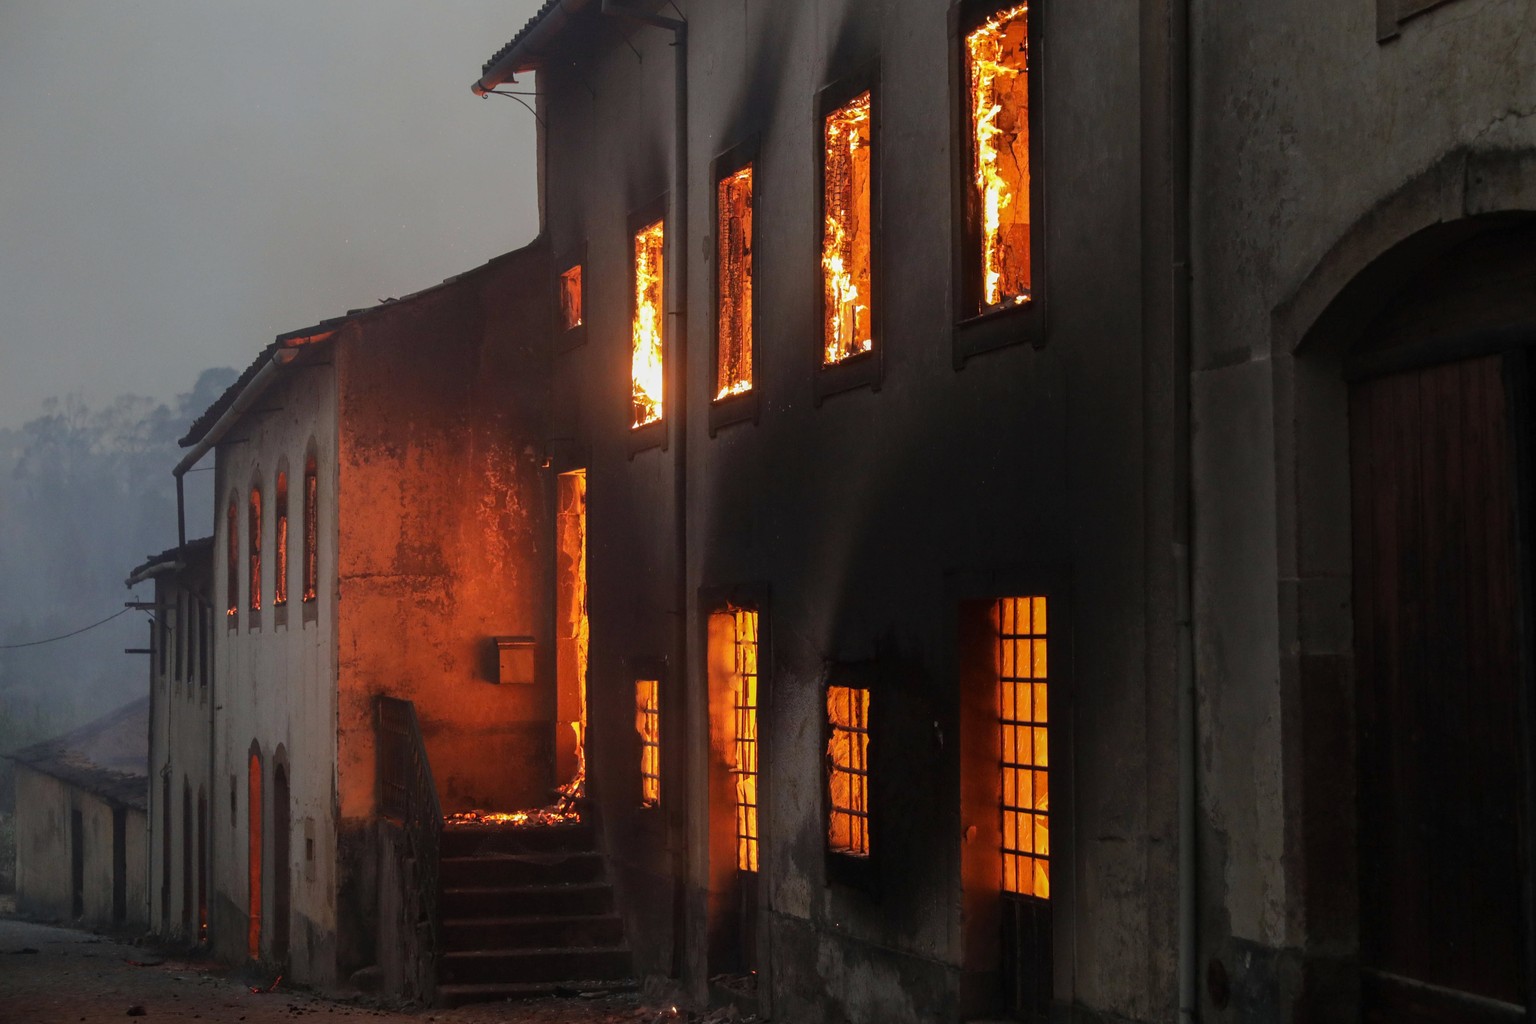 epa06268206 A house burns in Moinhos village, Lousa, Portugal, 15 October 2017. The National Civil Protection Authority (ANPC) said it &#039;was the worst day of the year in terms of fires&#039;, havi ...